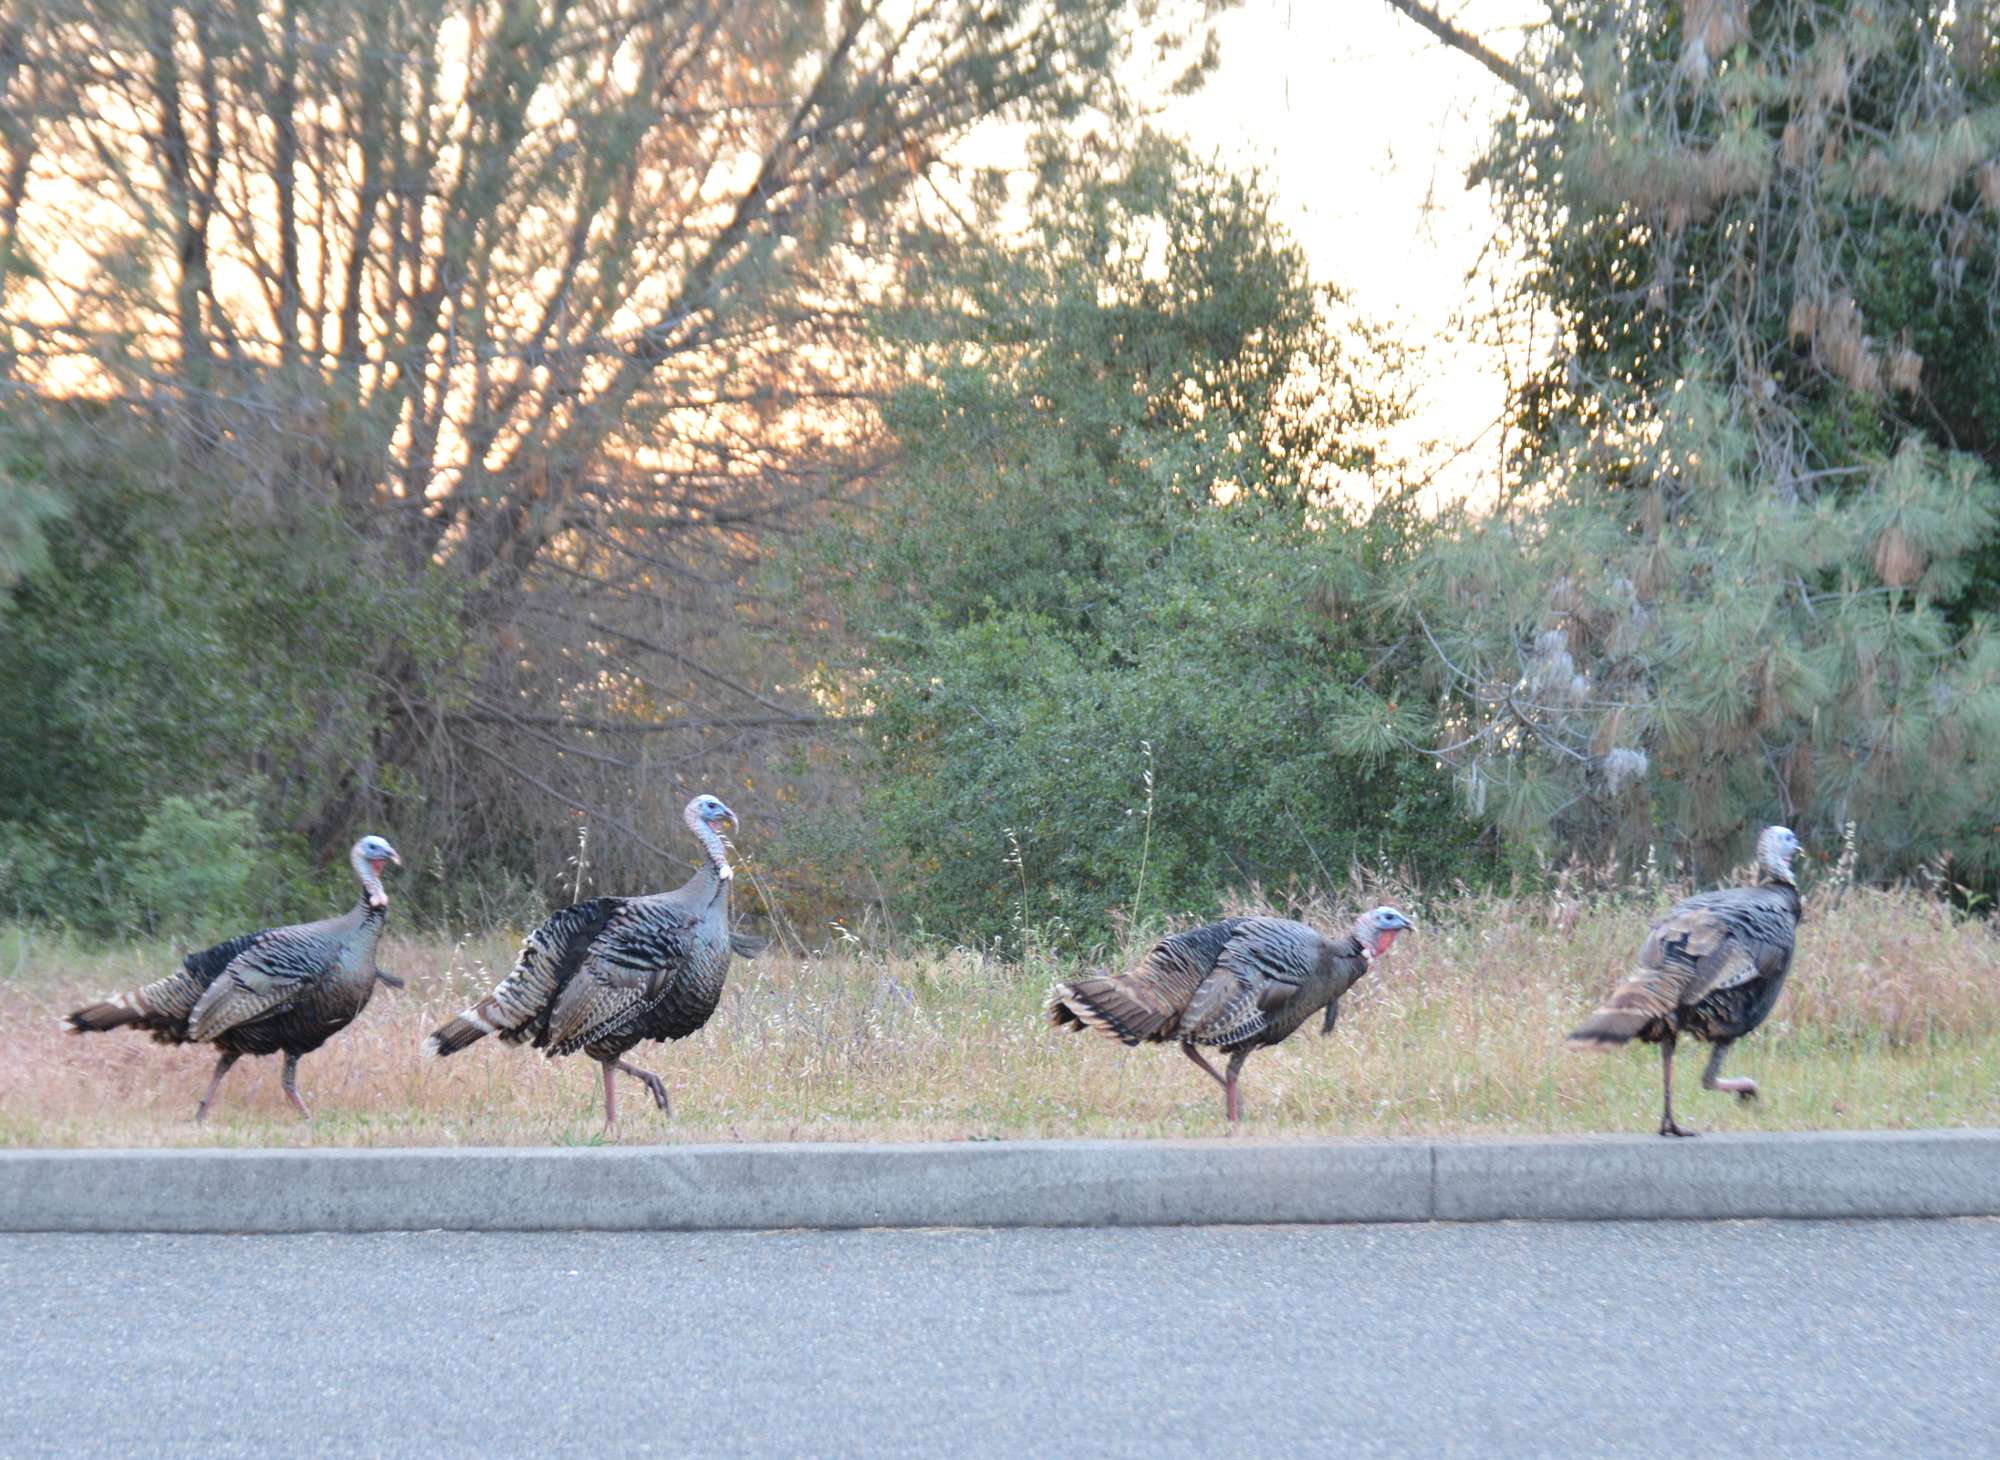 The turkeys are large and in charge. And we learned that if you honk your car horn, they'll immediately gobble in unison.